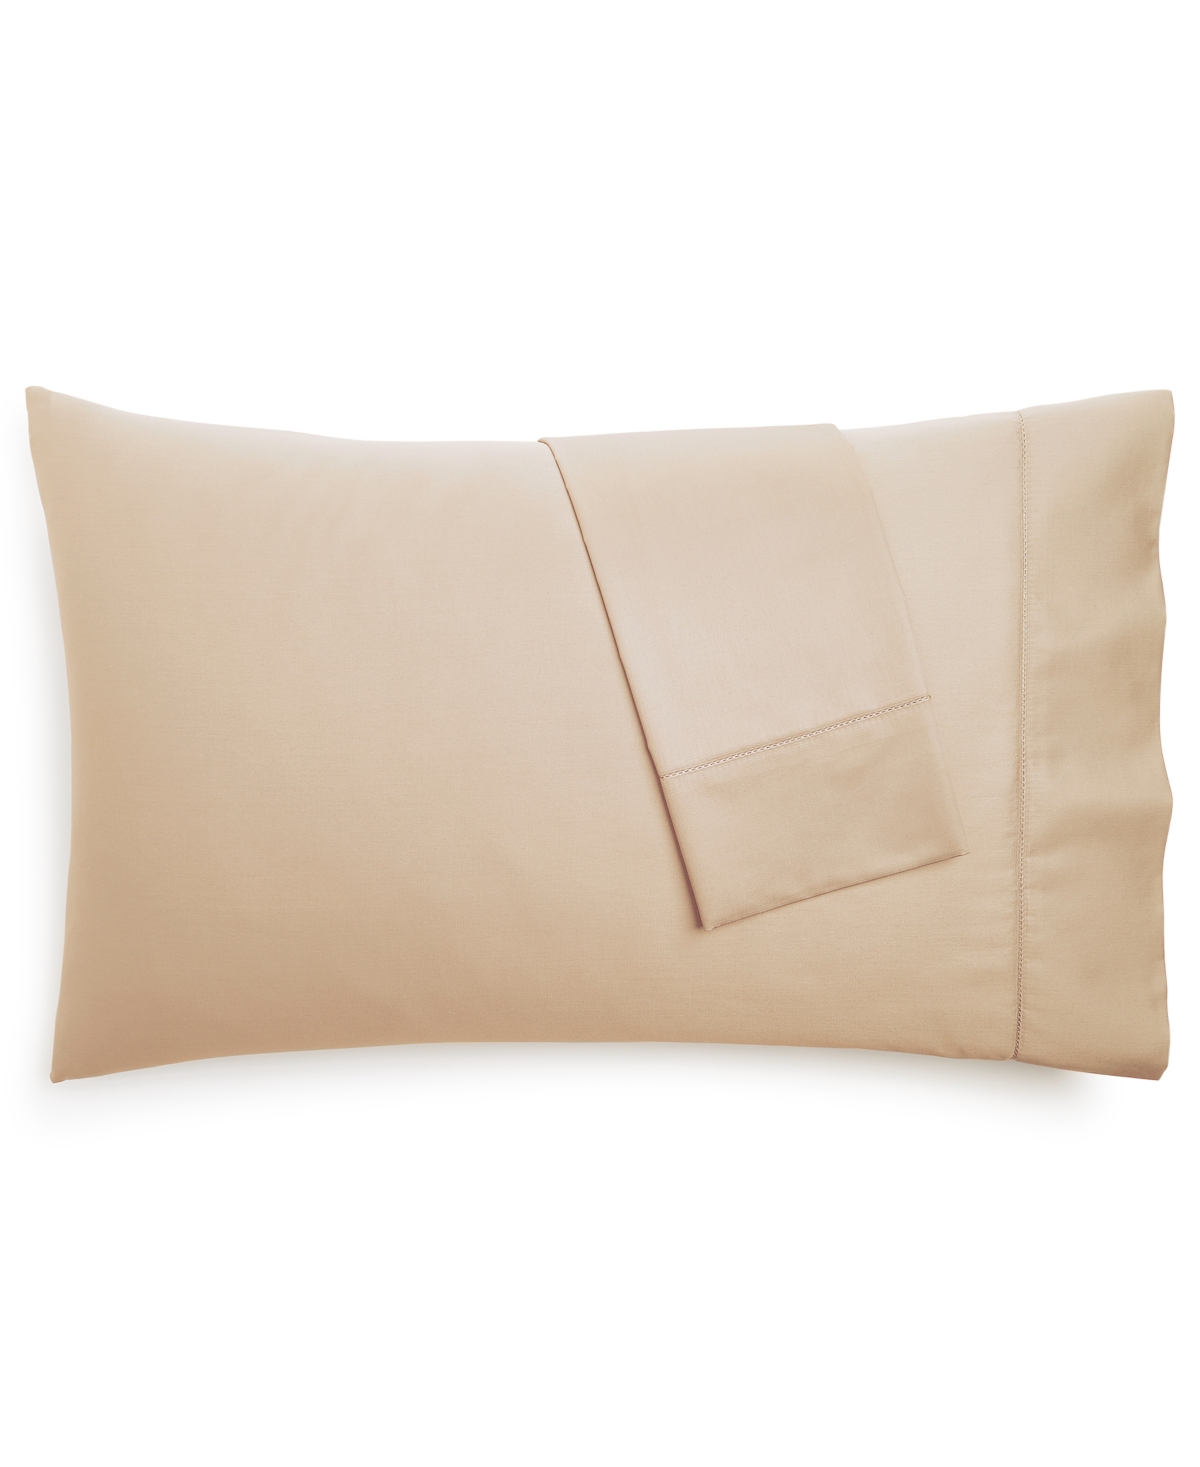 Hotel Collection 1000 Thread Count 100% Supima Cotton Pillowcase, Standard, Created For Macy's In Tan